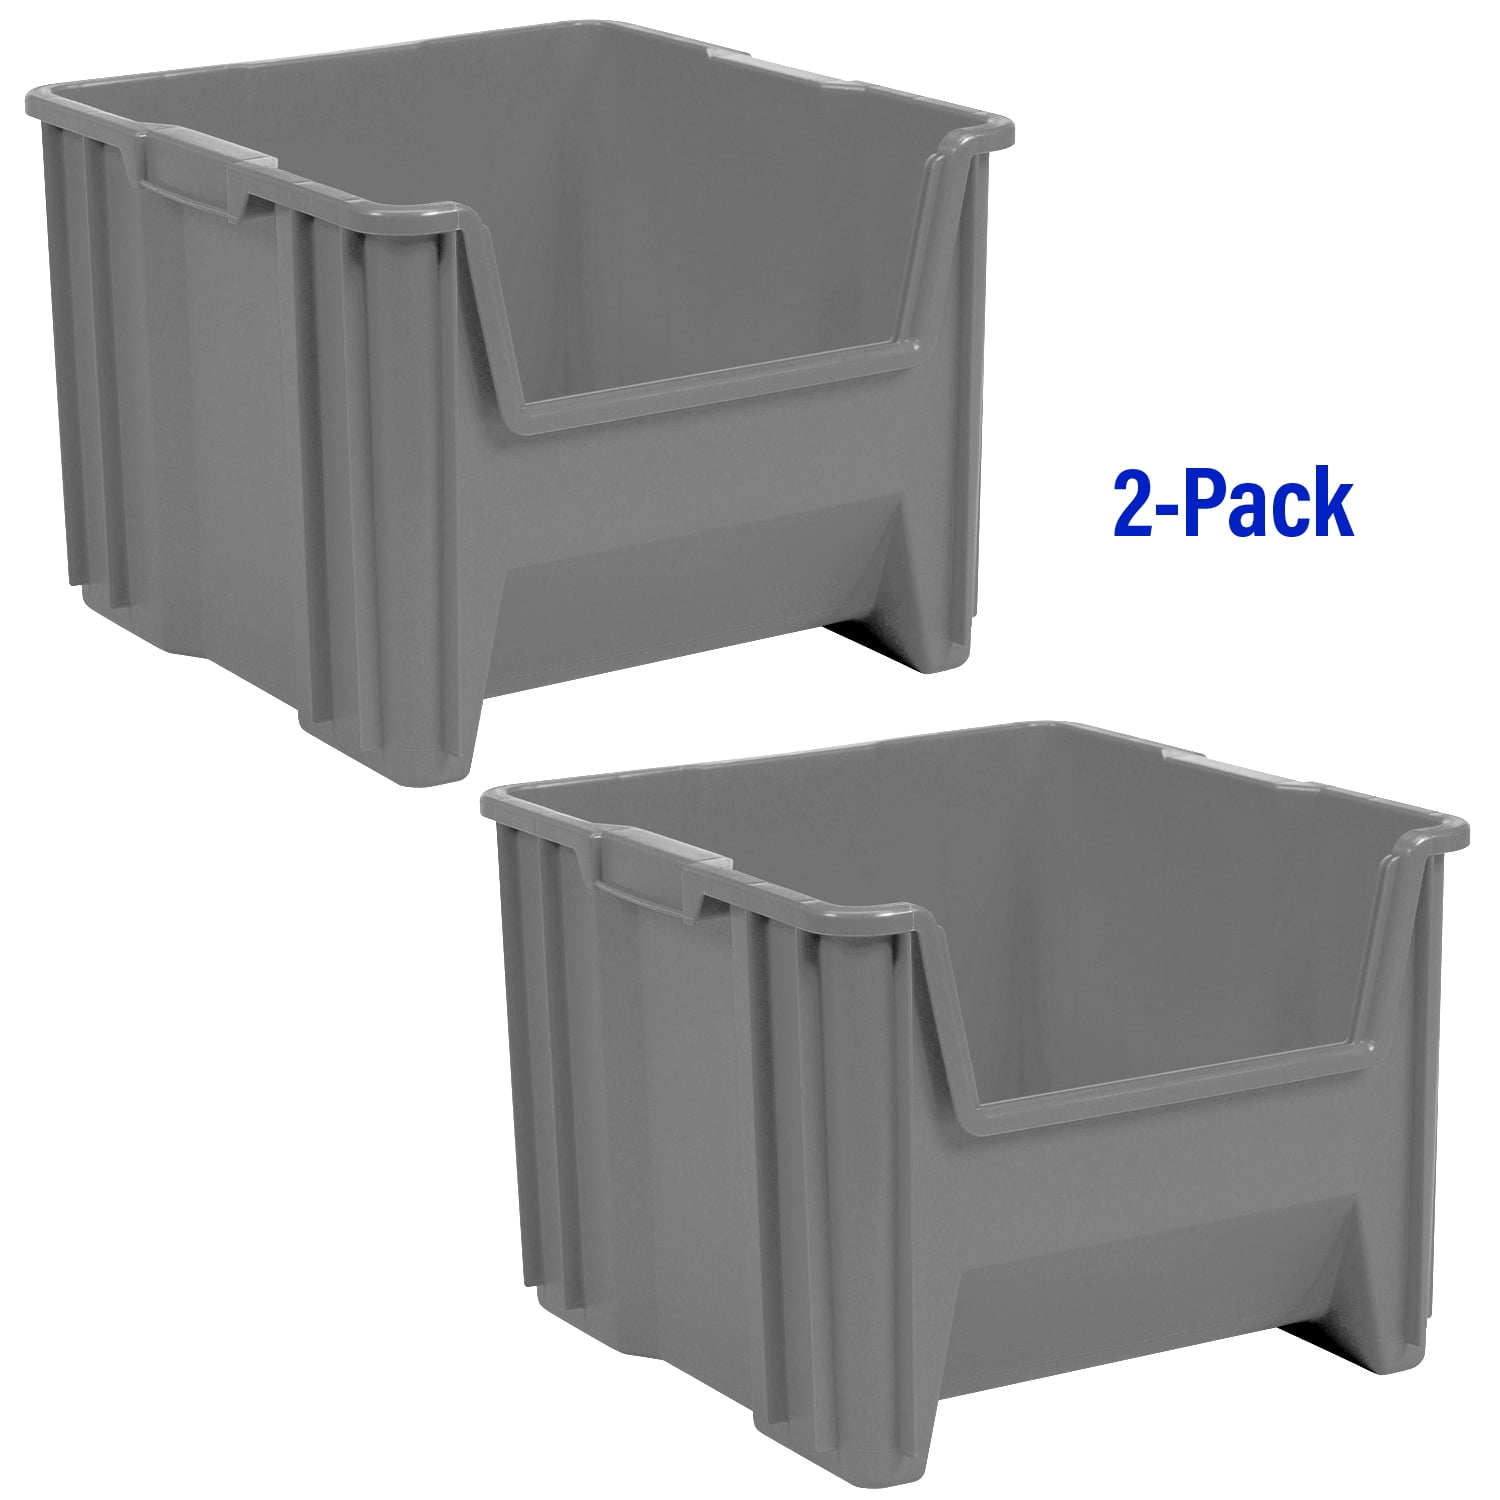 RW Base Gray Plastic Collapsible Storage Container - 21 x 15 1/2